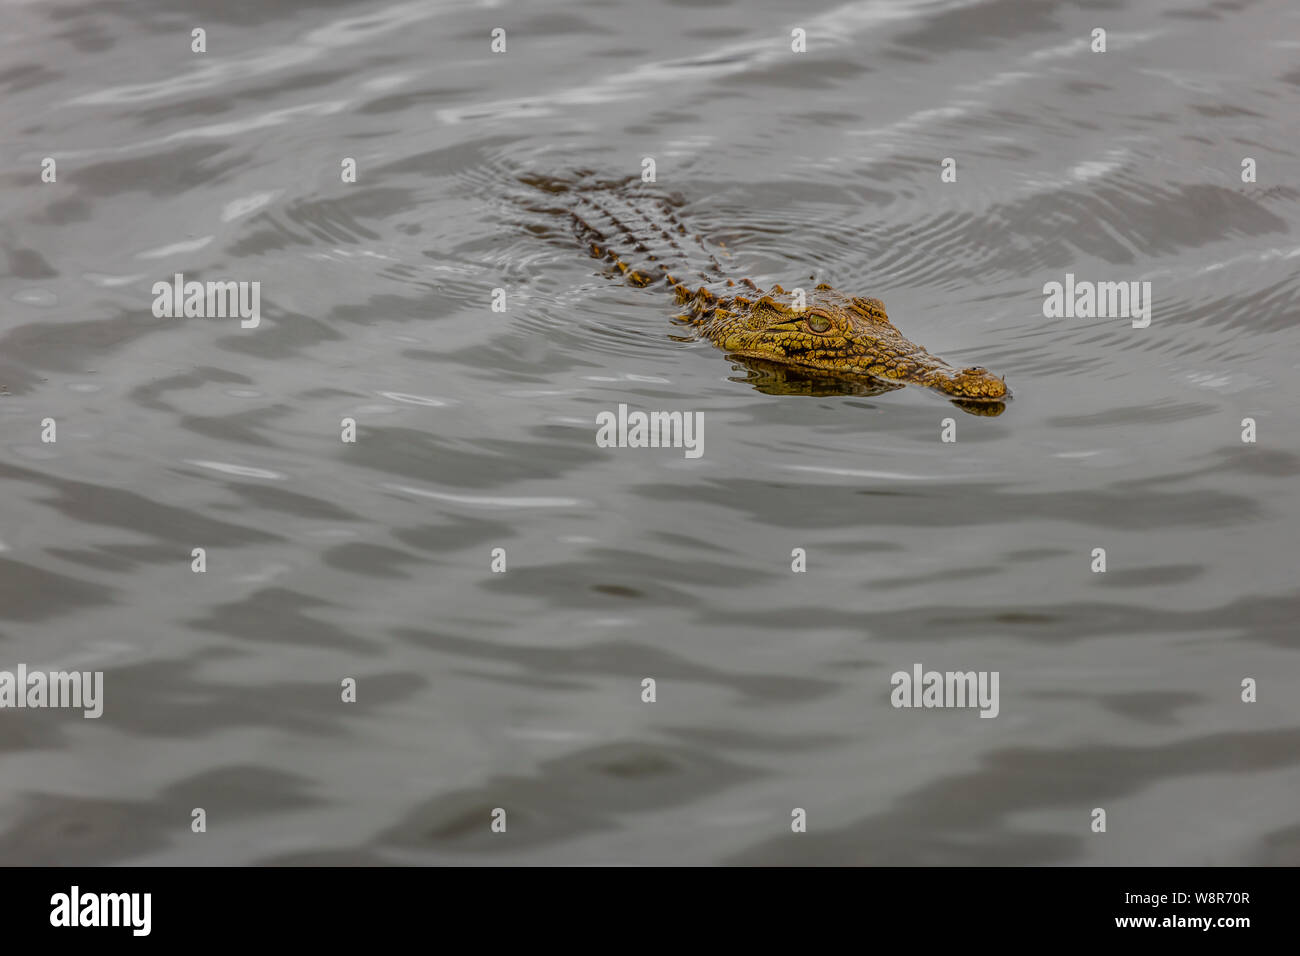 A crocodile in Kruger National Park, South Africa Stock Photo